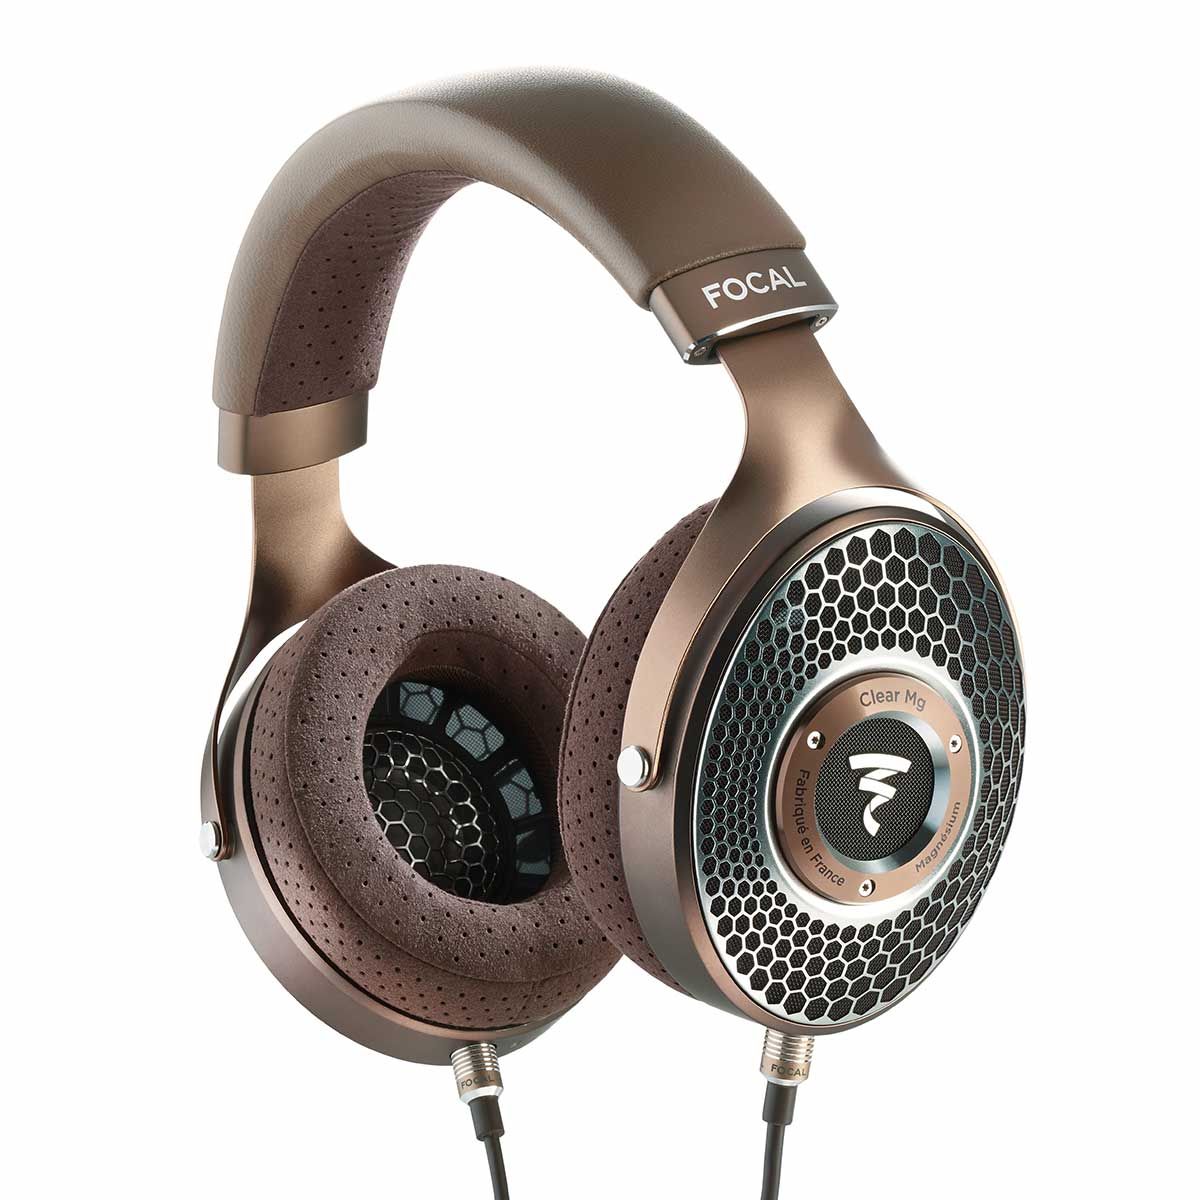 Focal Clear Mg Headphones, front angle